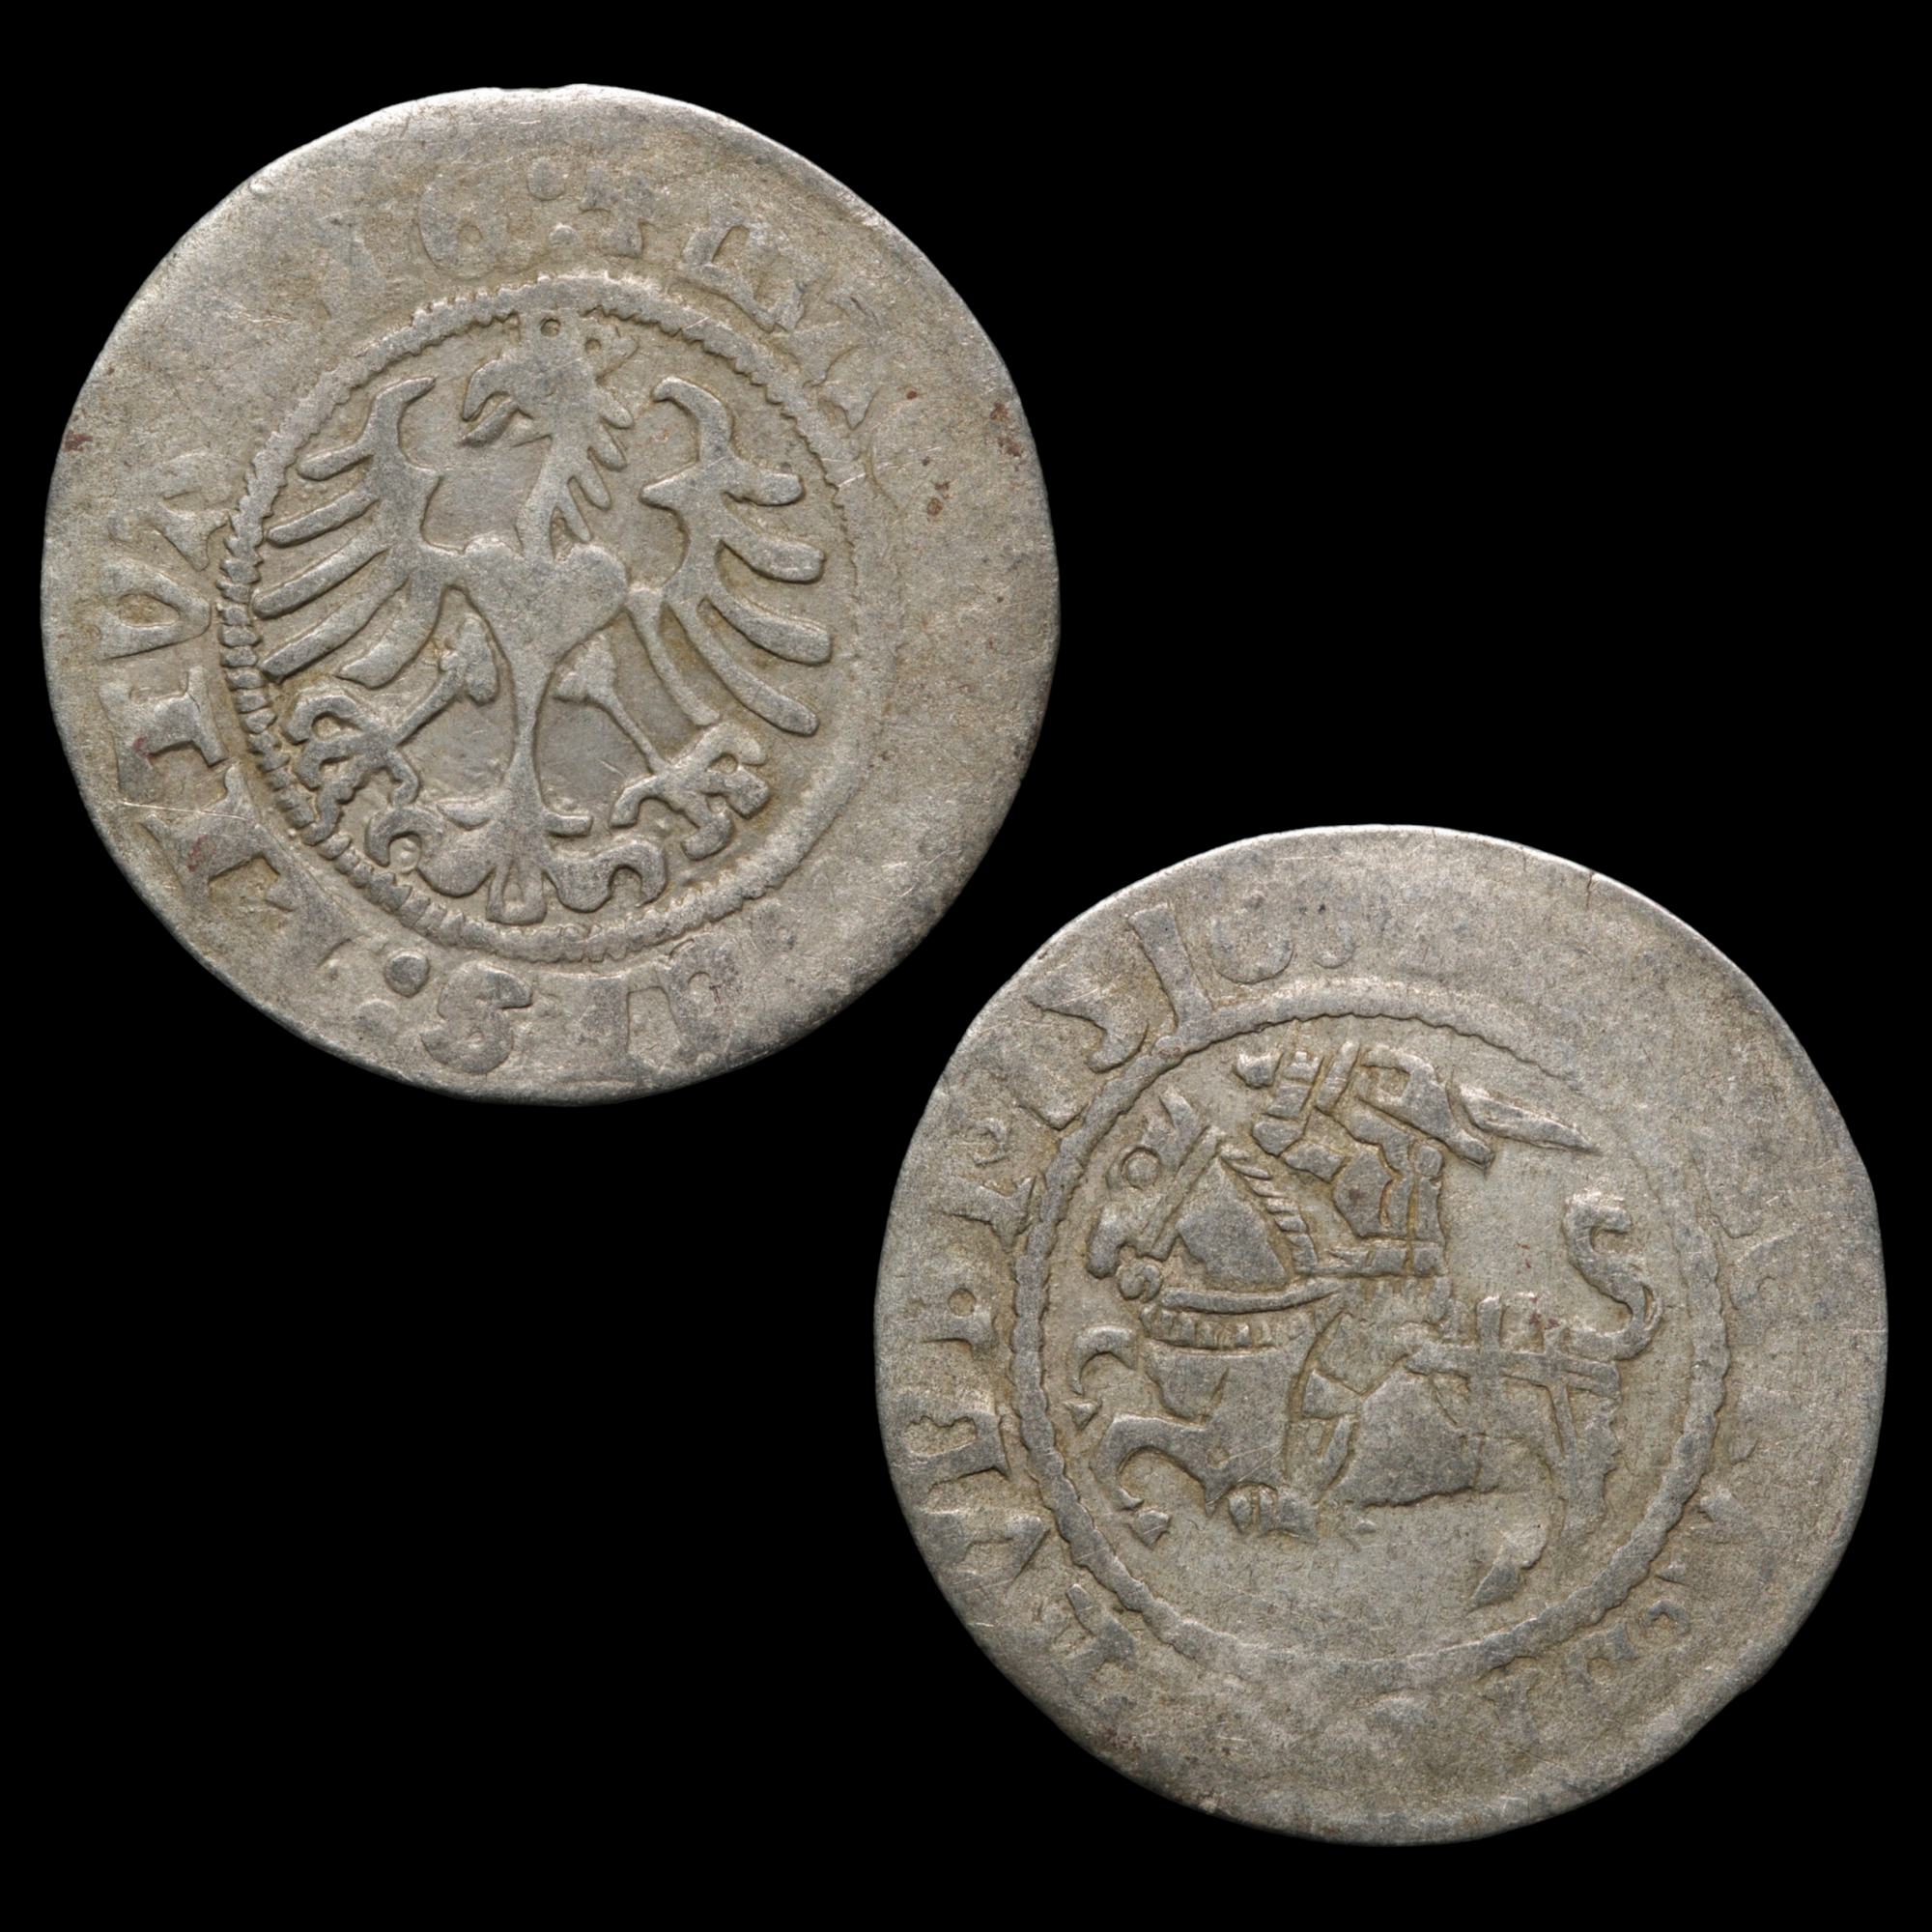 Grand Duchy of Lithuania, Sigismund I, Half Groat  - 1509 to 1518 CE - Eastern Europe - 10/19/23 Auction